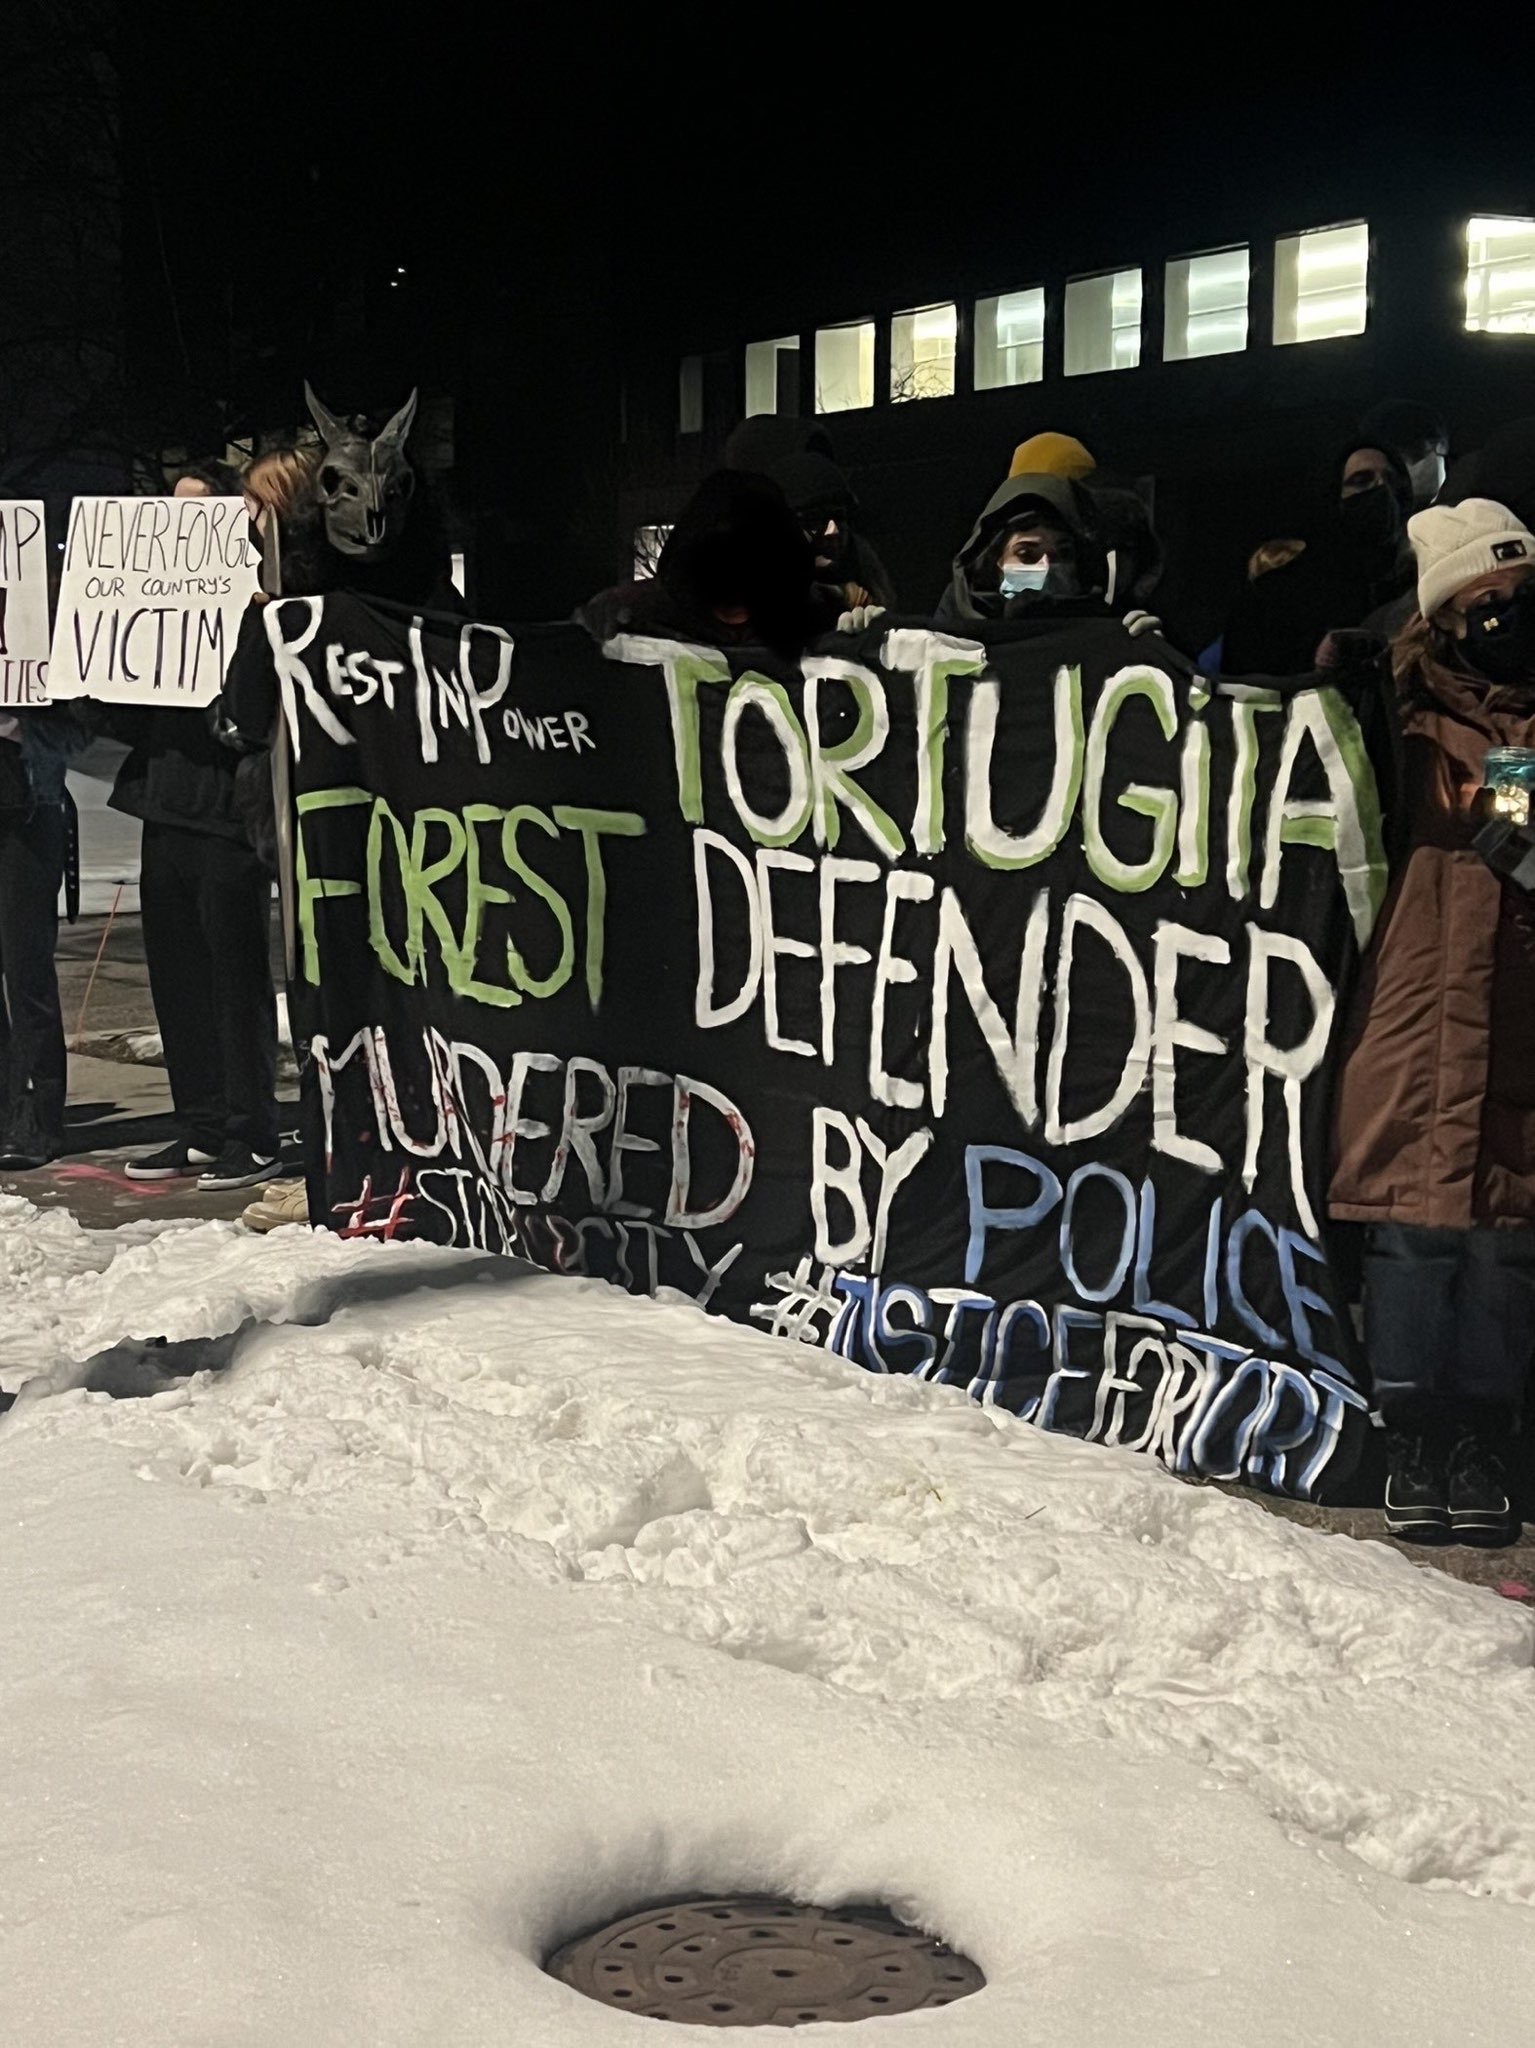 Ann Arbor: Protest to Stop Cop City staged at Merrill Lynch and Porsche; Tortugita Remembered